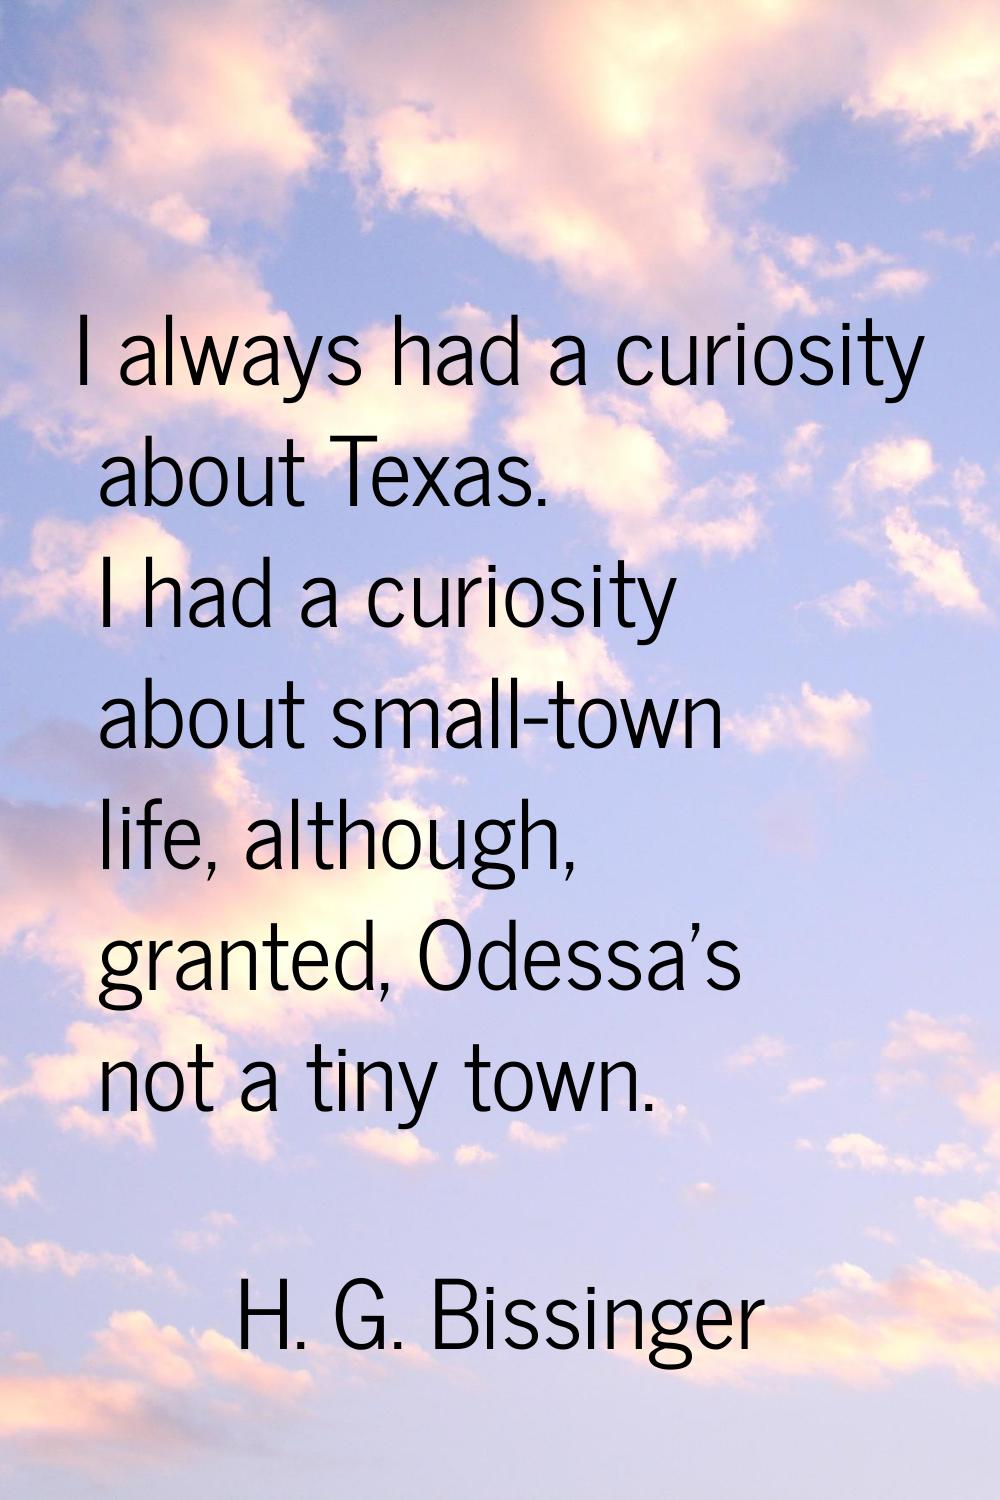 I always had a curiosity about Texas. I had a curiosity about small-town life, although, granted, O